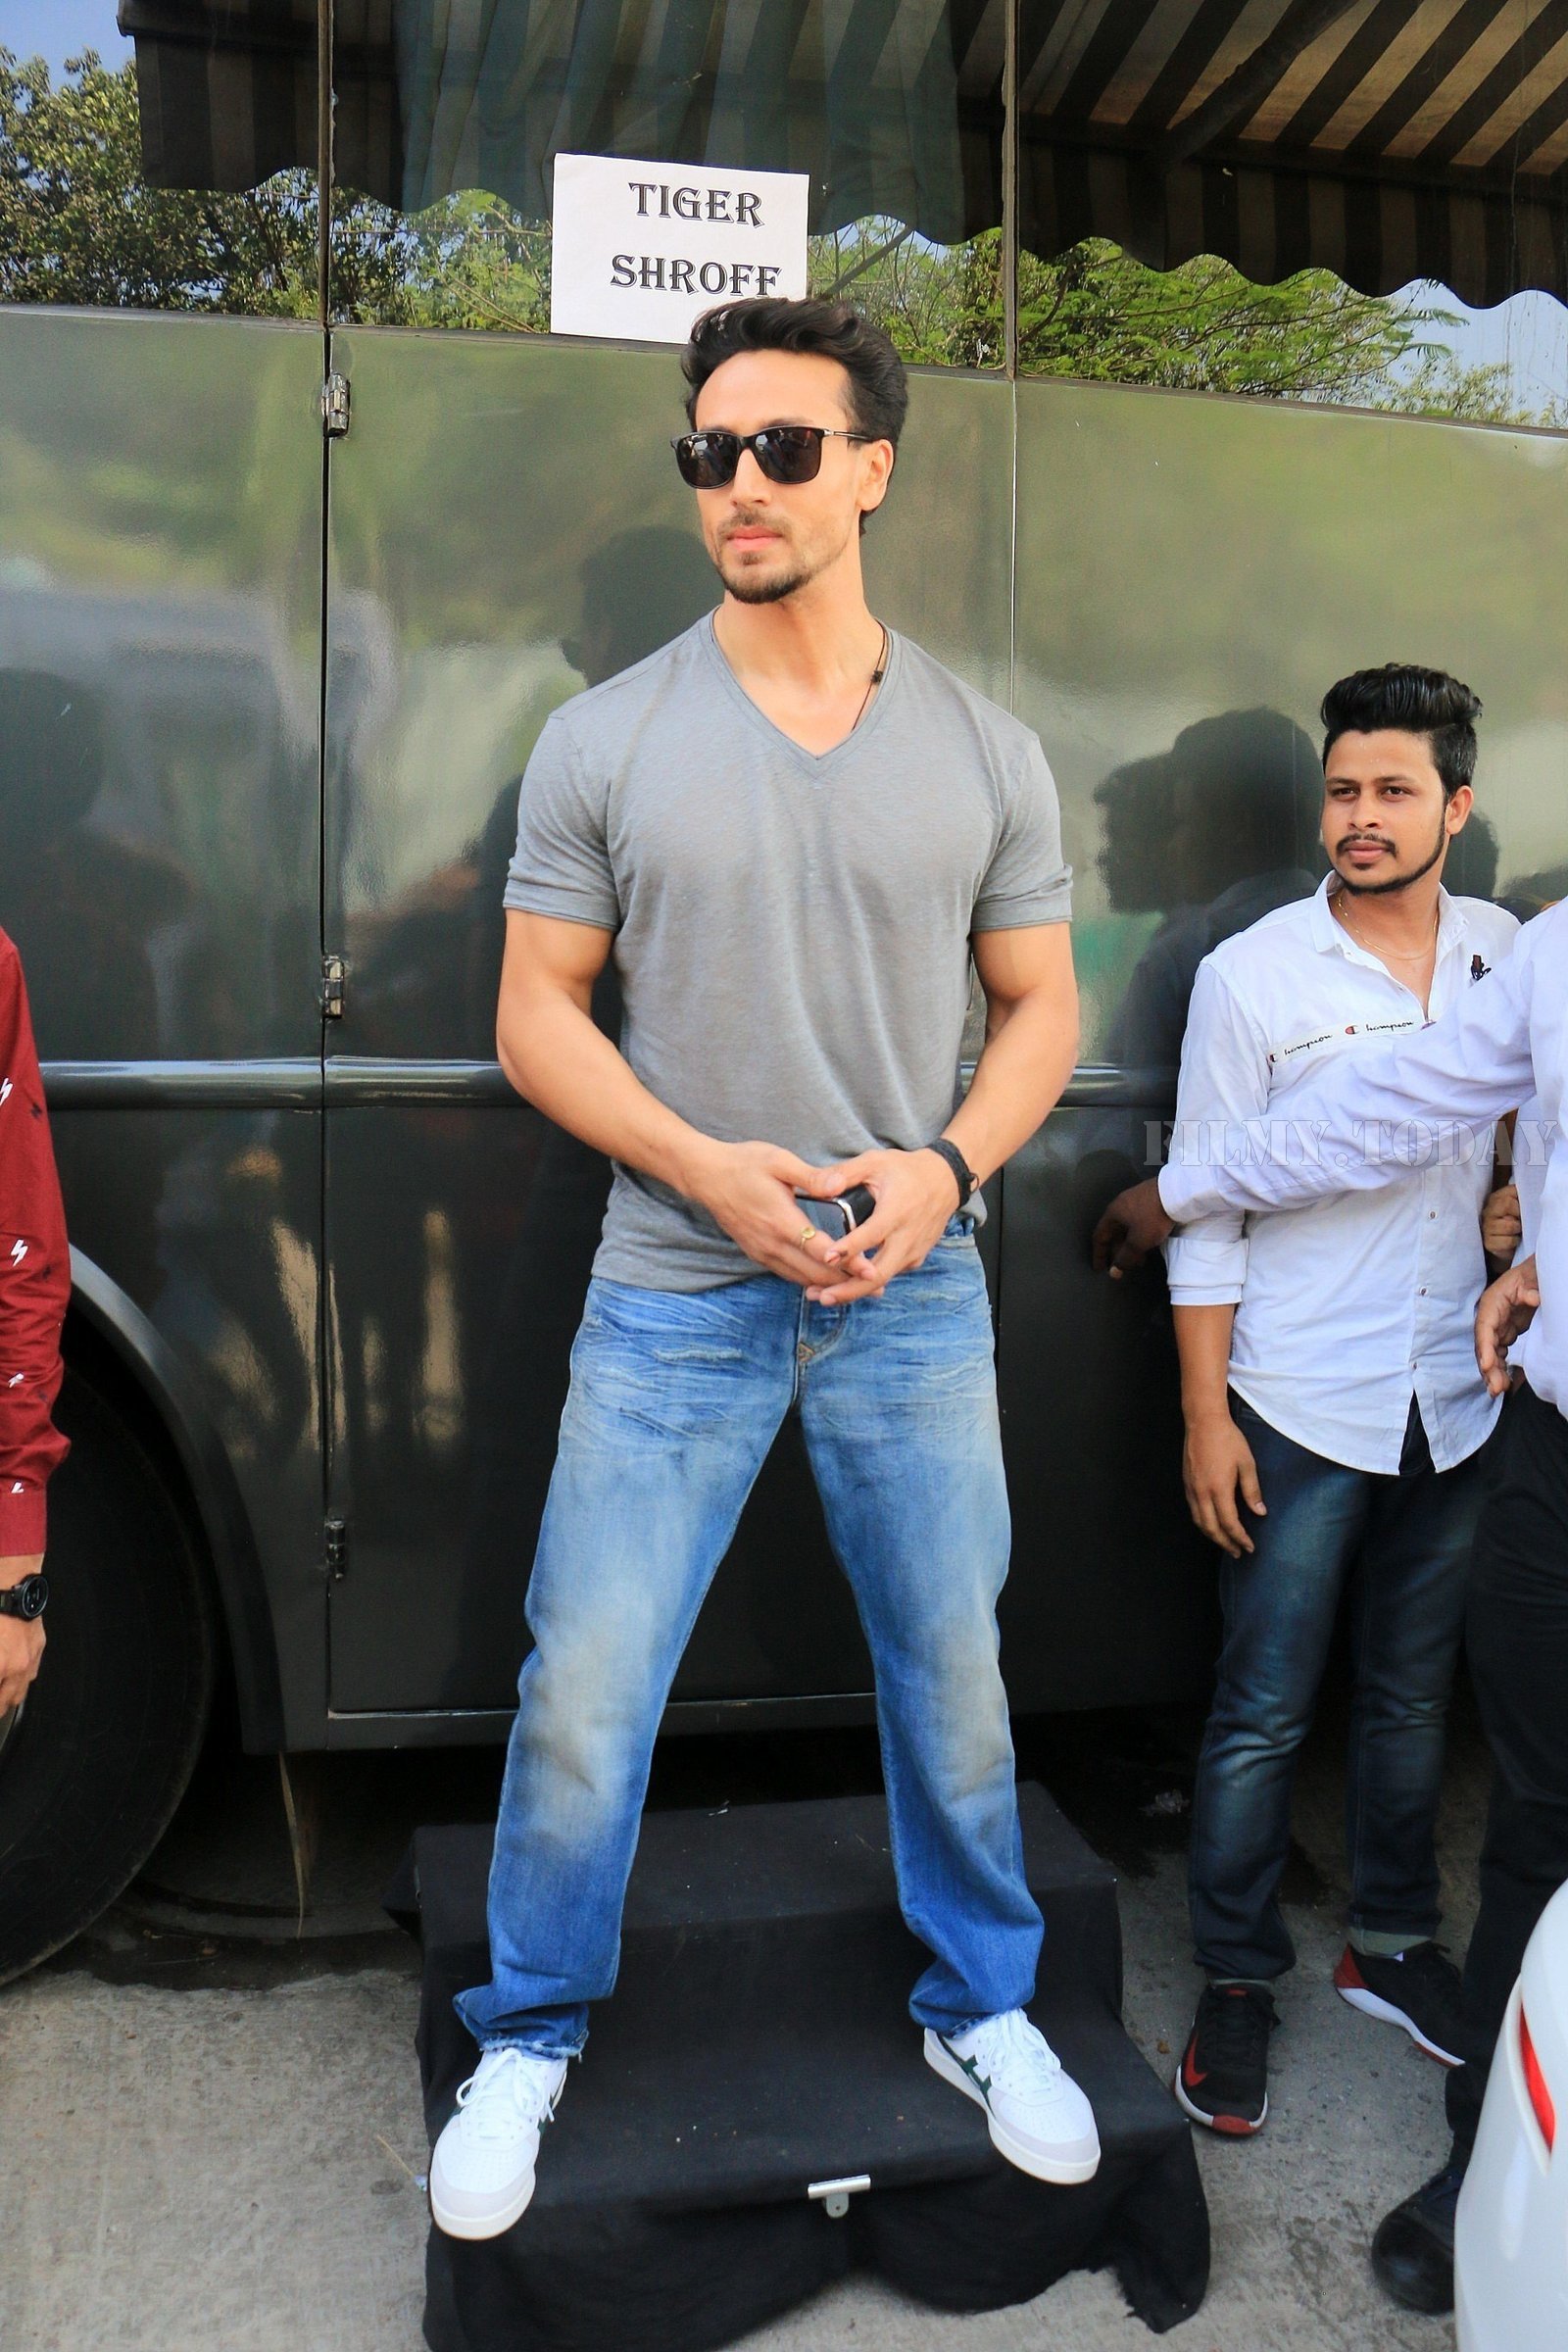 Tiger Shroff - Photos: Promotion Of Student Of The year 2 on the sets of Super Dancer Chapter 3 | Picture 1645528